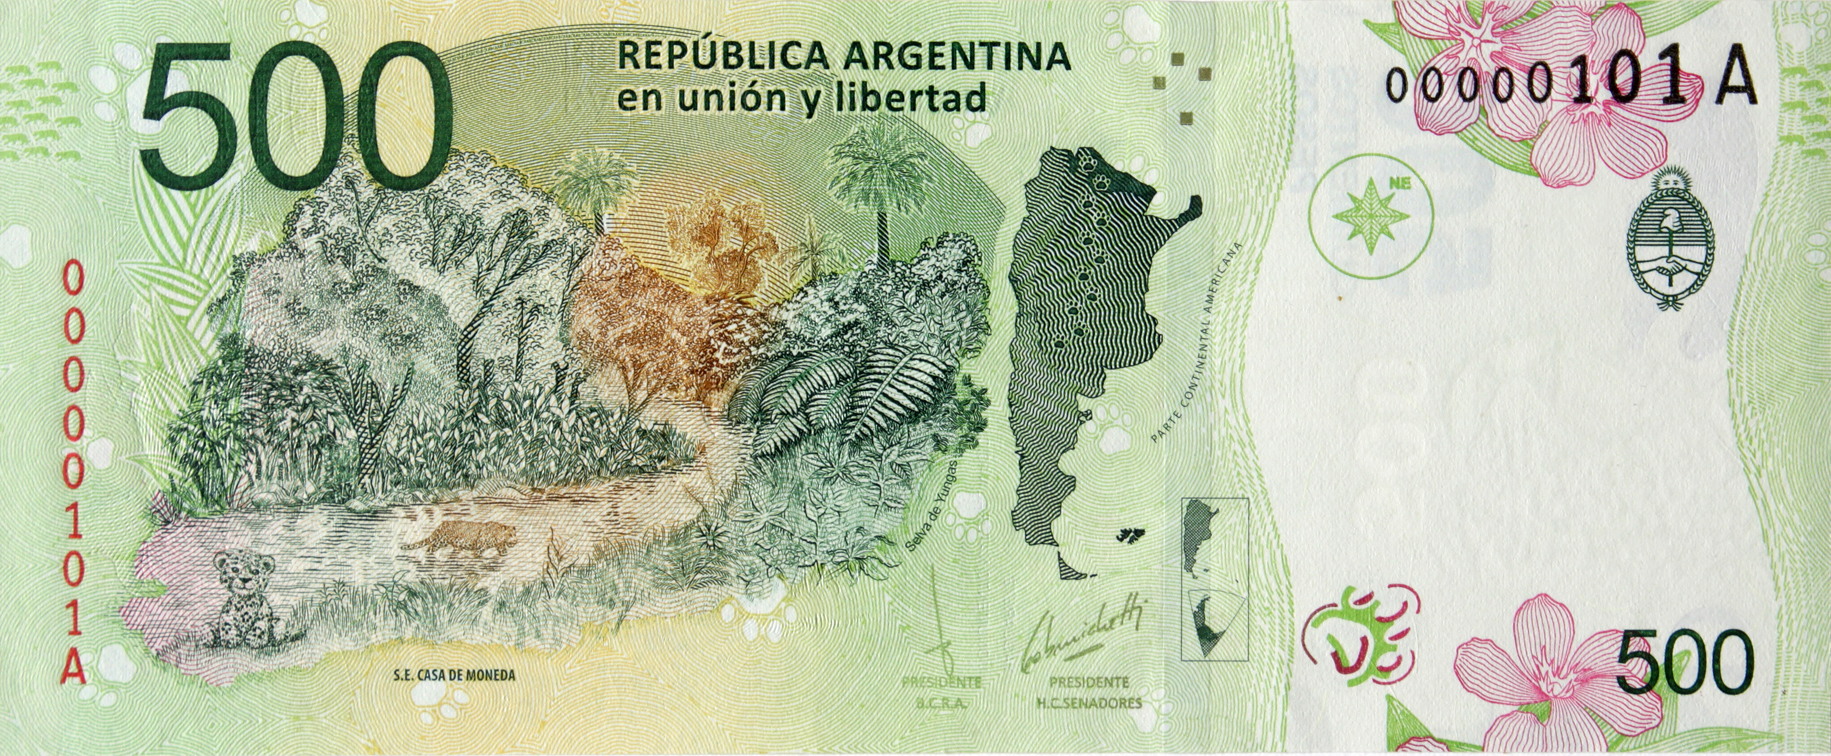 Argentina new 500-peso note (B421a) confirmed – BanknoteNews